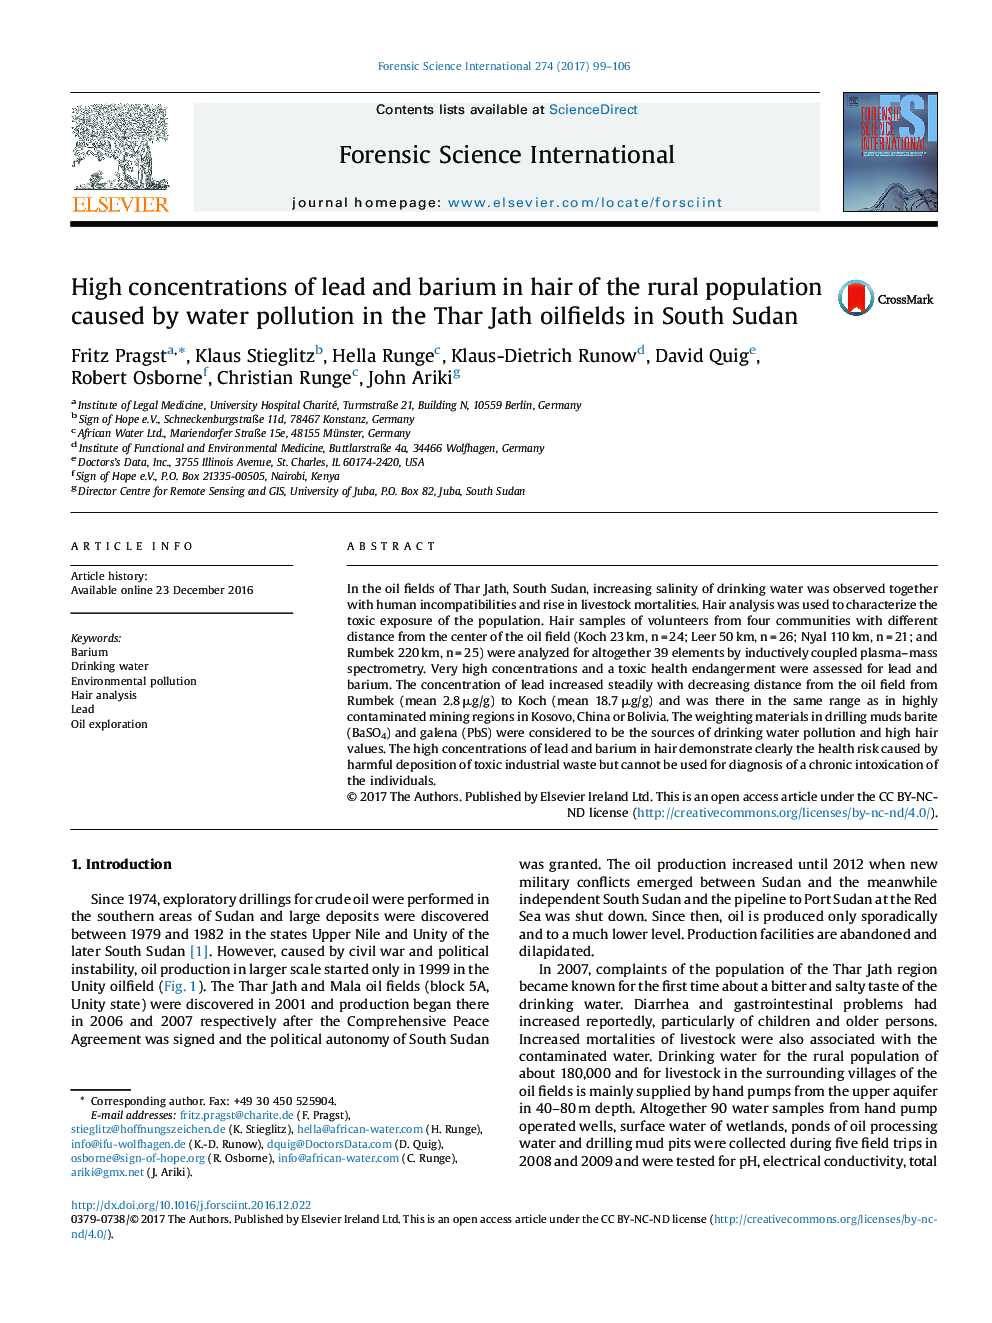 High concentrations of lead and barium in hair of the rural population caused by water pollution in the Thar Jath oilfields in South Sudan